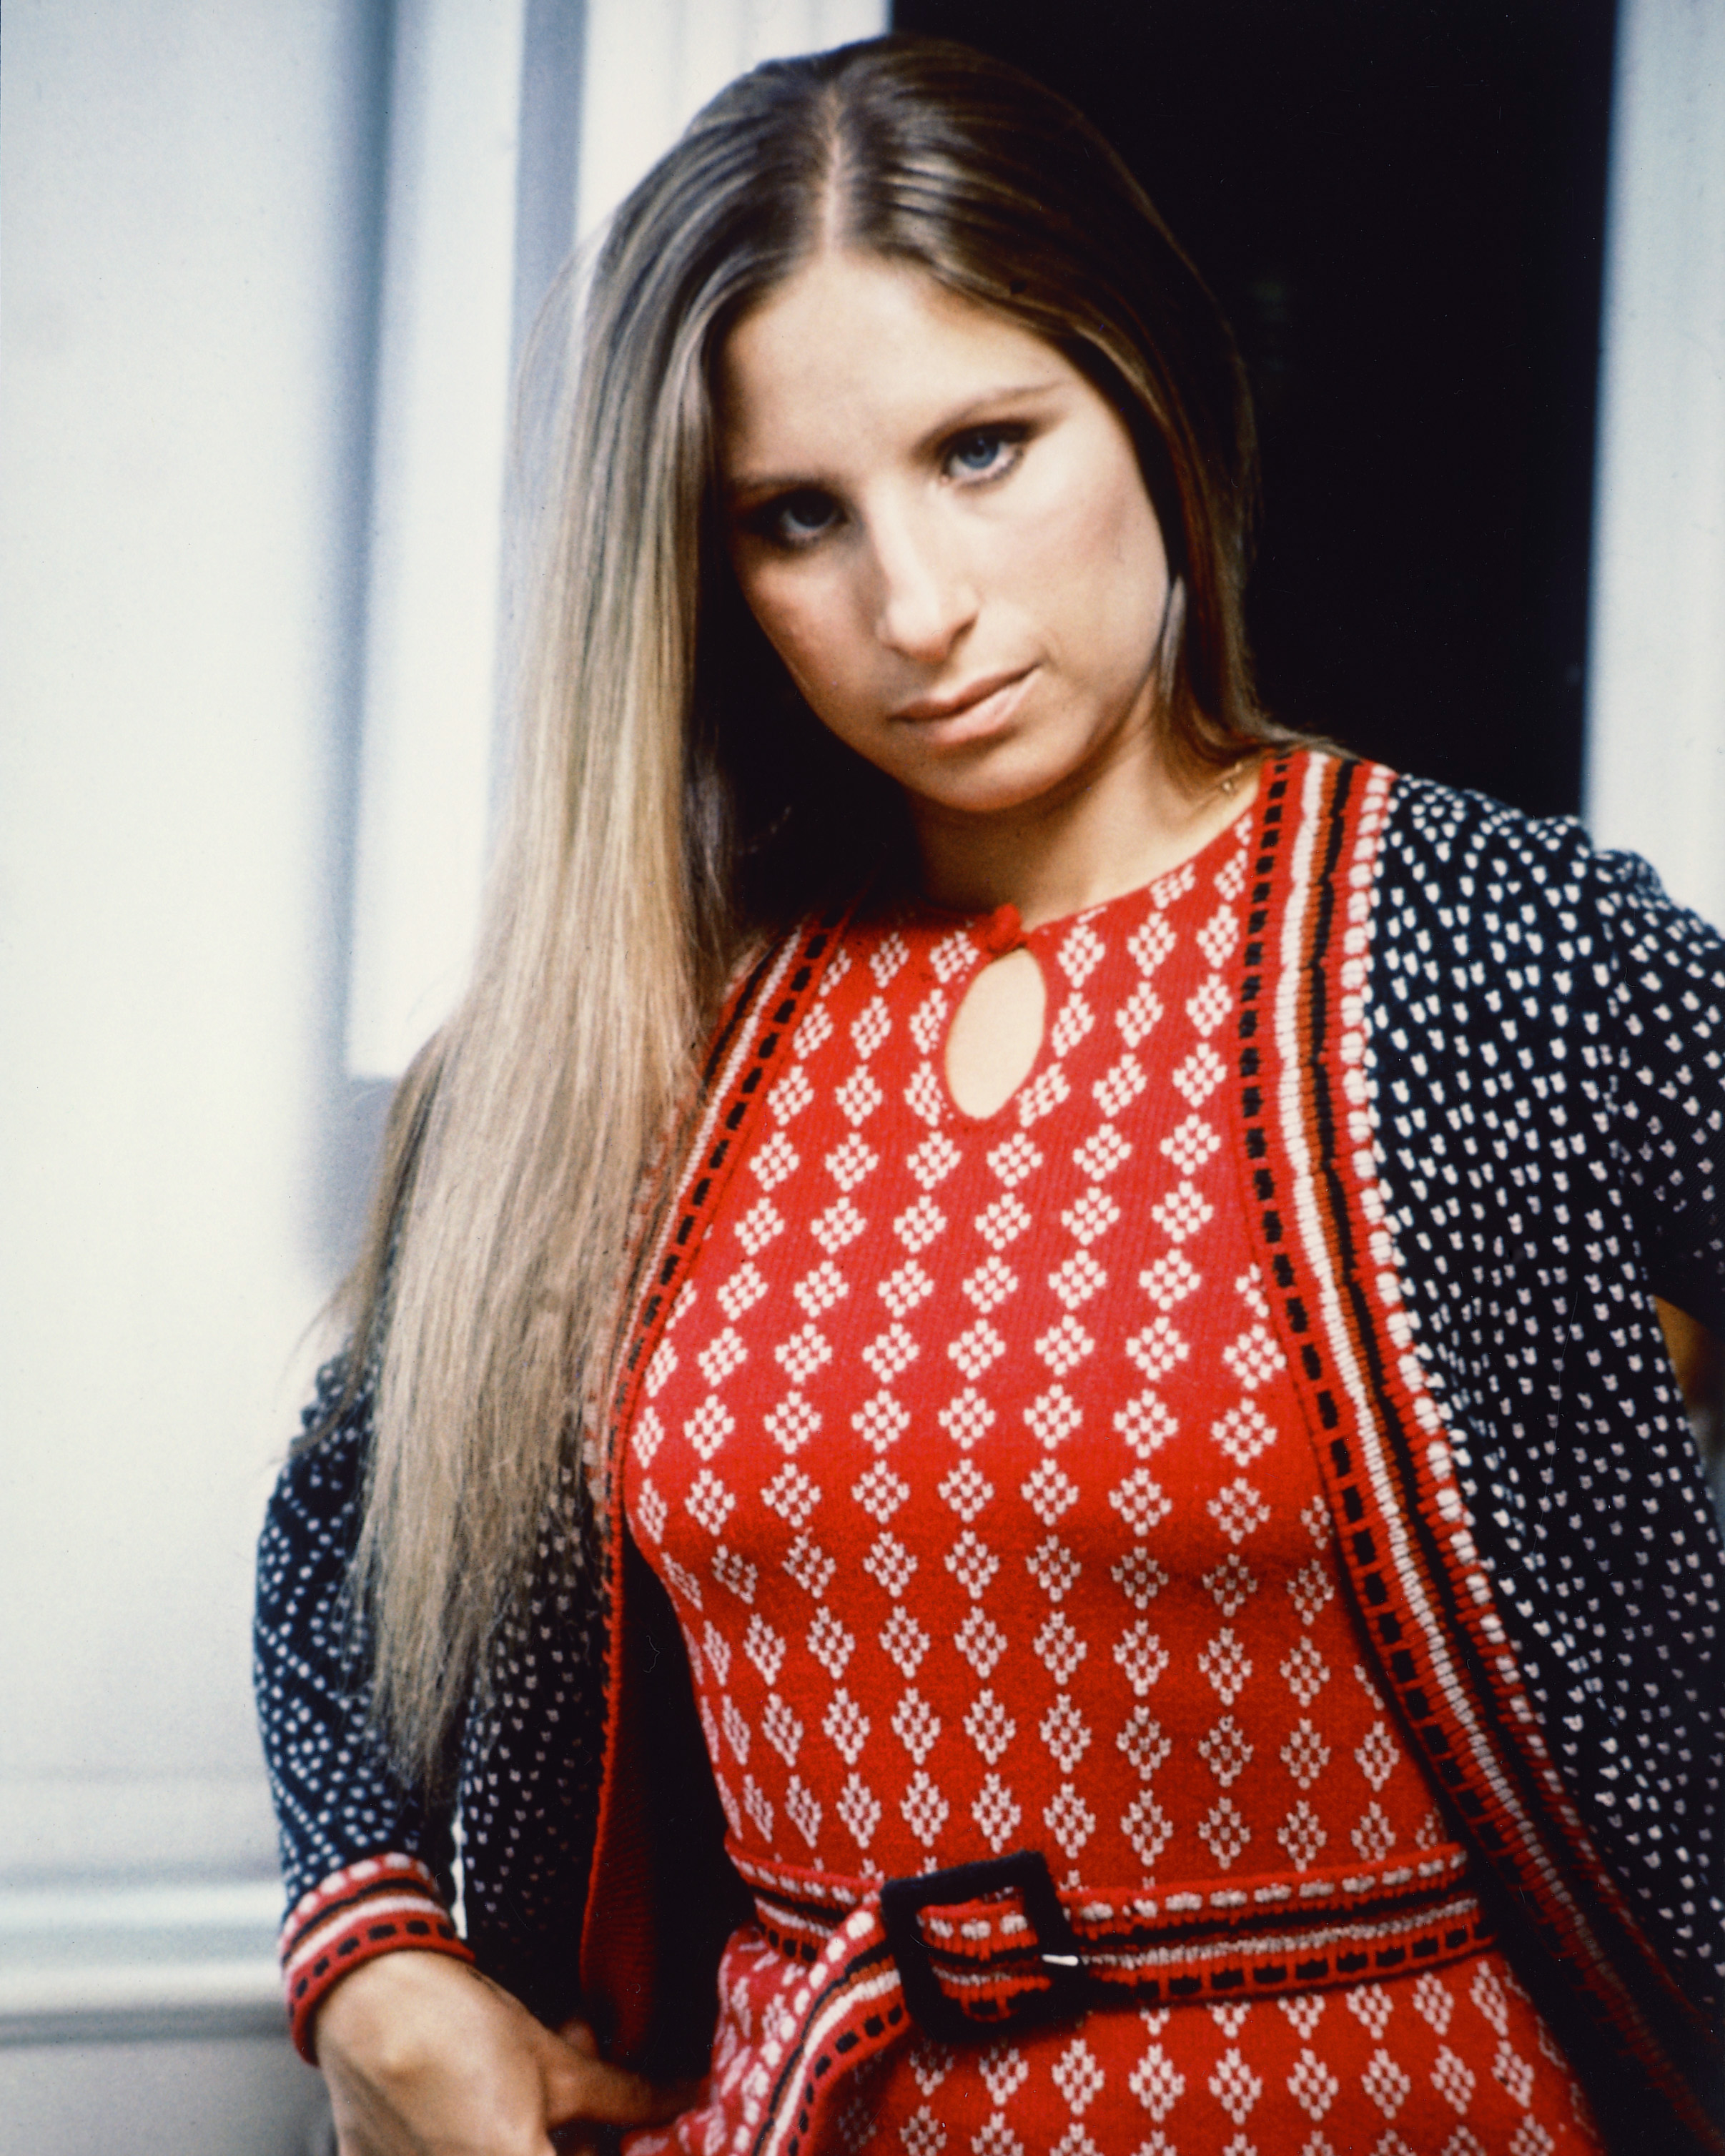 Barbra Streisand posing for a portrait picture in 1965 | Source: Getty Images